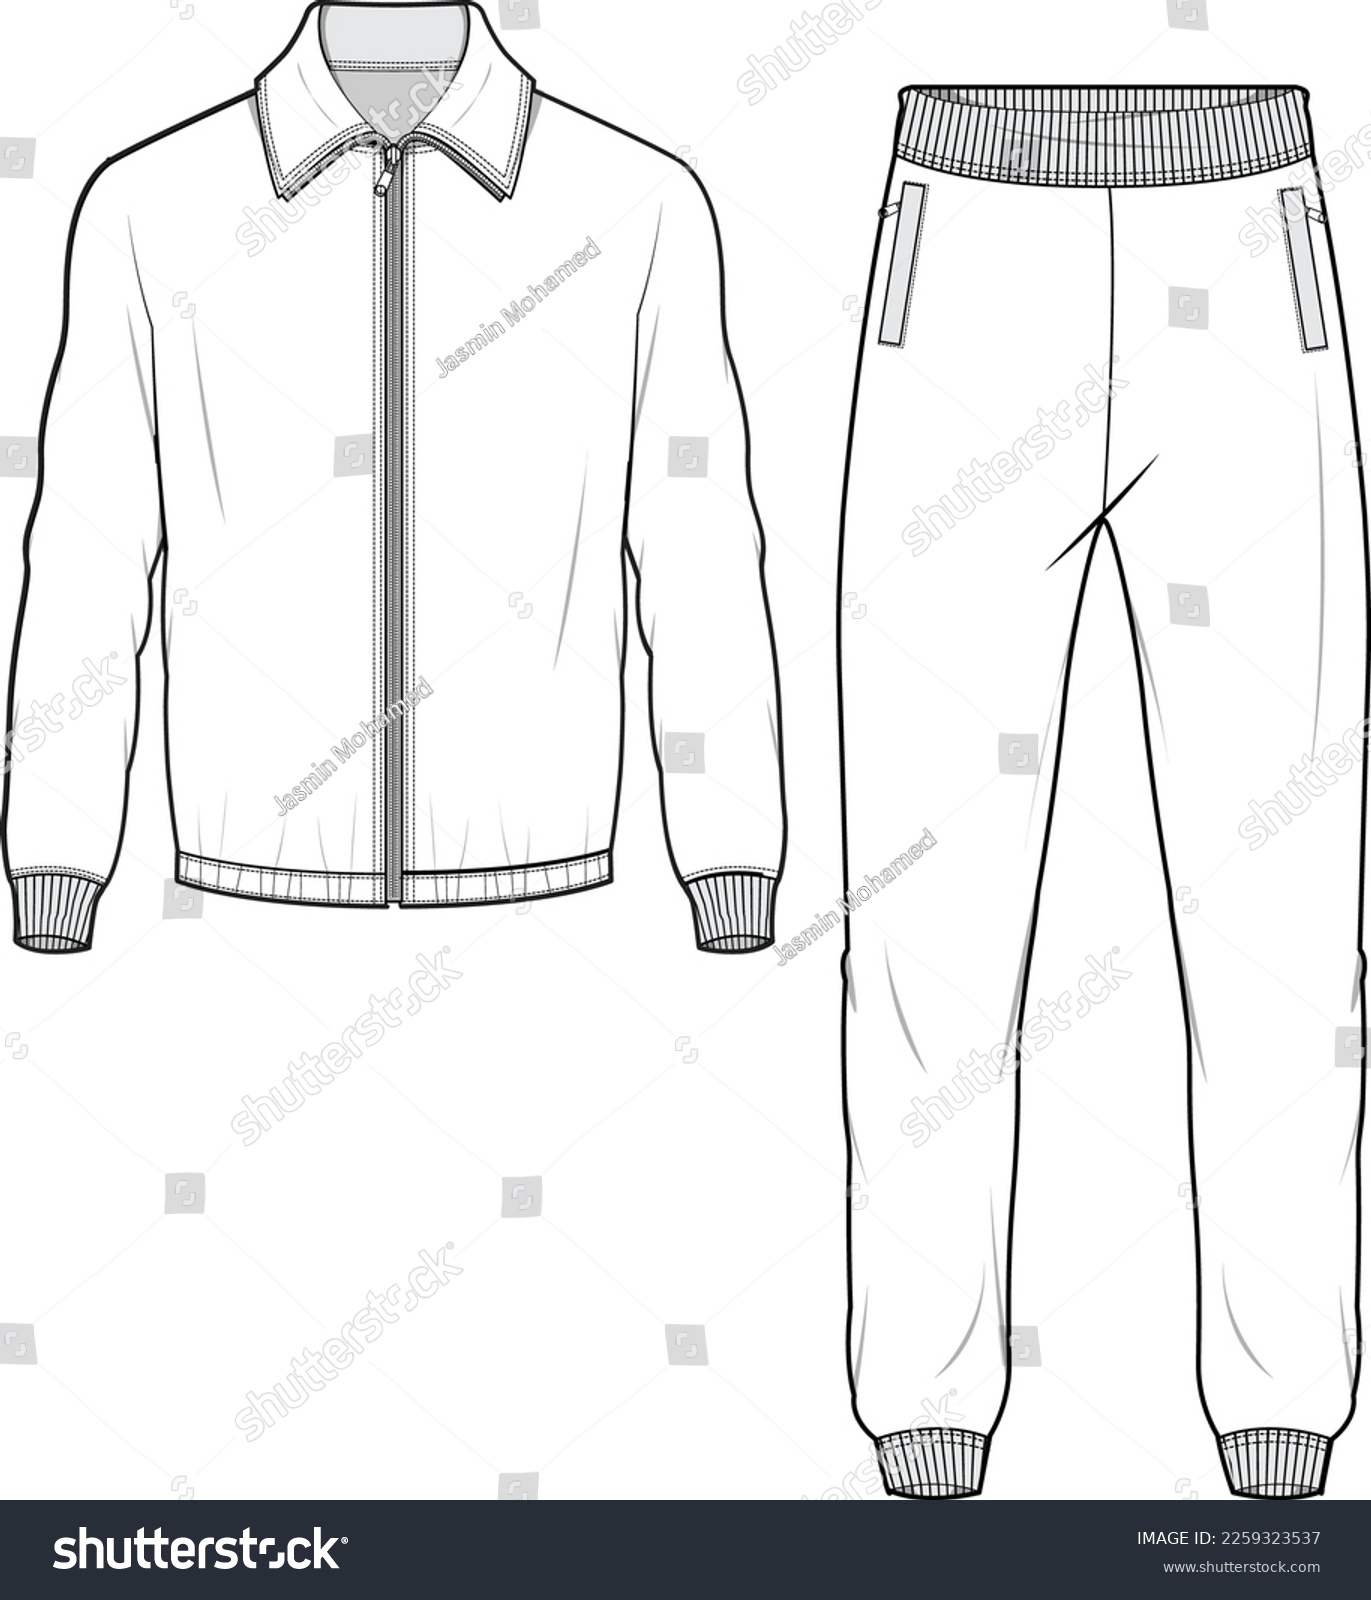 SVG of Tracksuit Fashion Illustration, Vector, CAD, Technical Drawing, Flat Drawing, Template, Mockup.	 svg